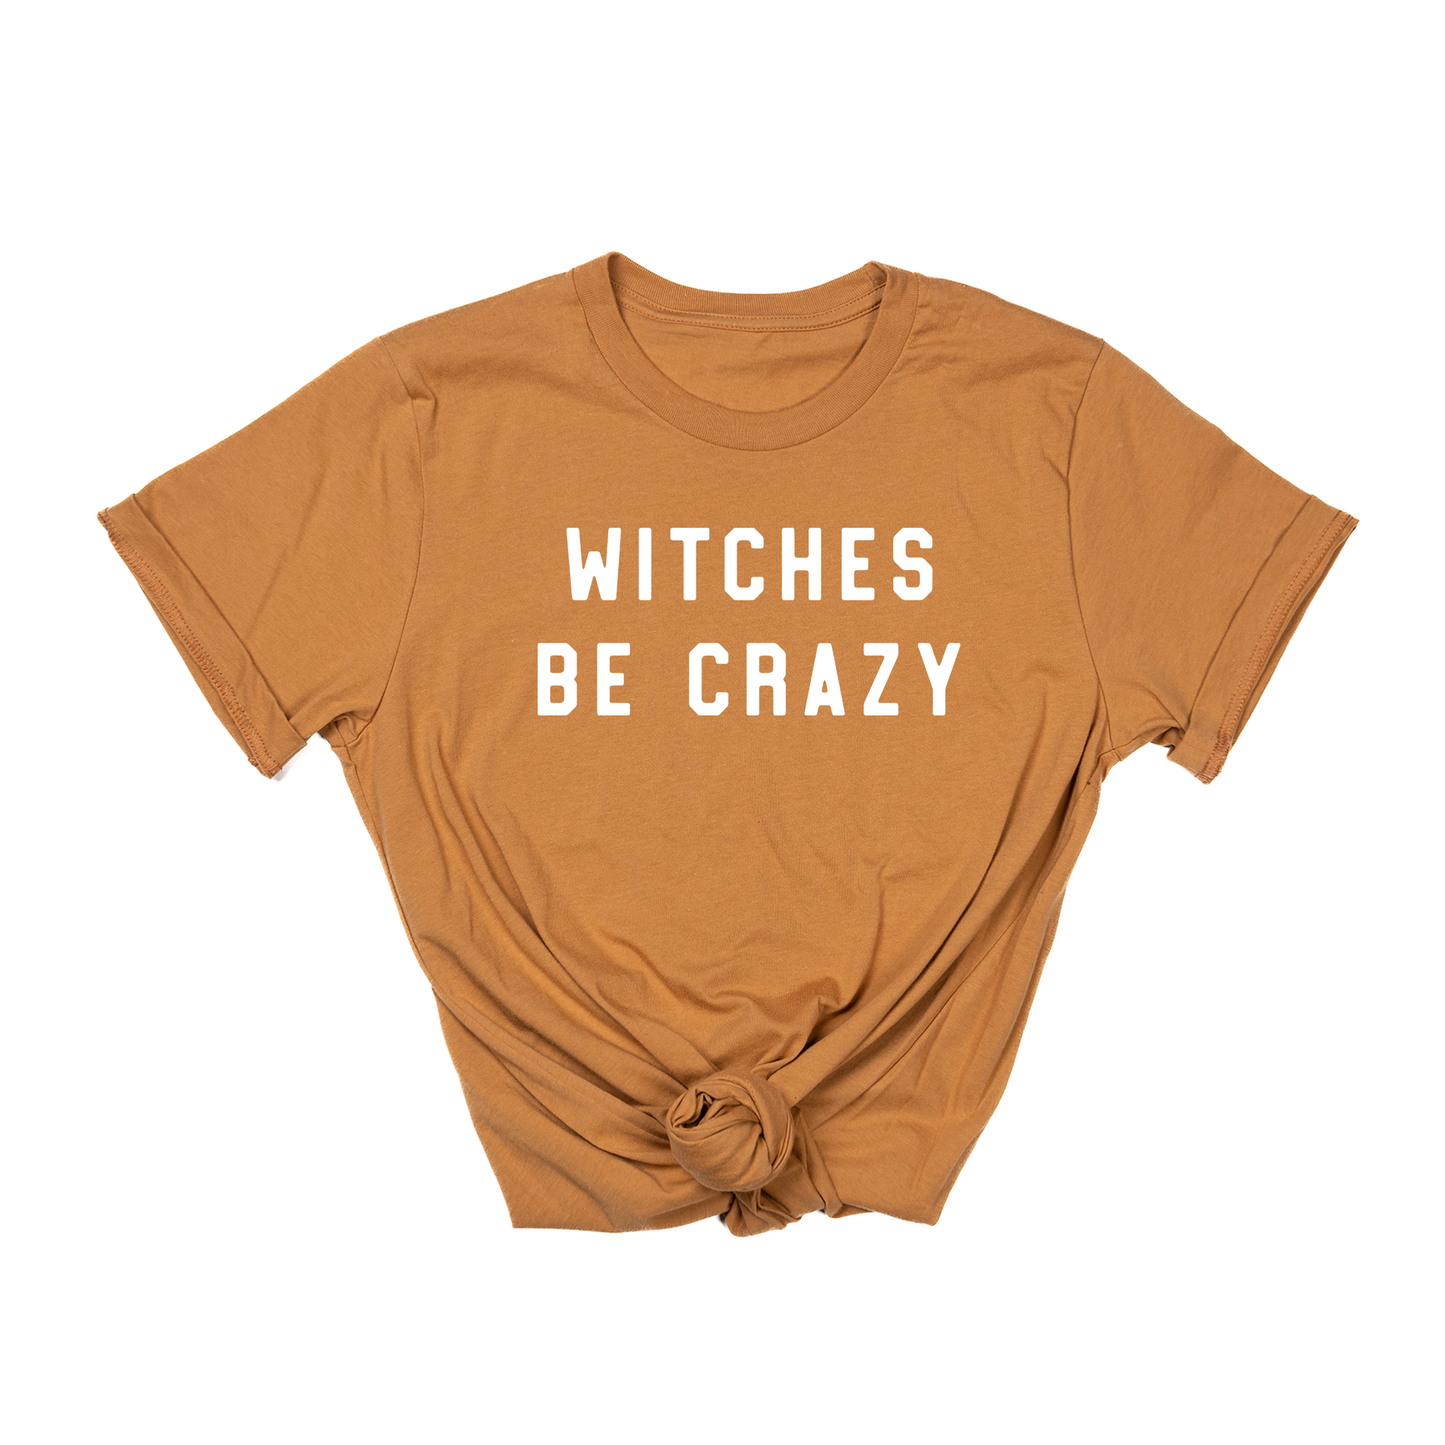 Witches Be Crazy (White) - Tee (Camel)